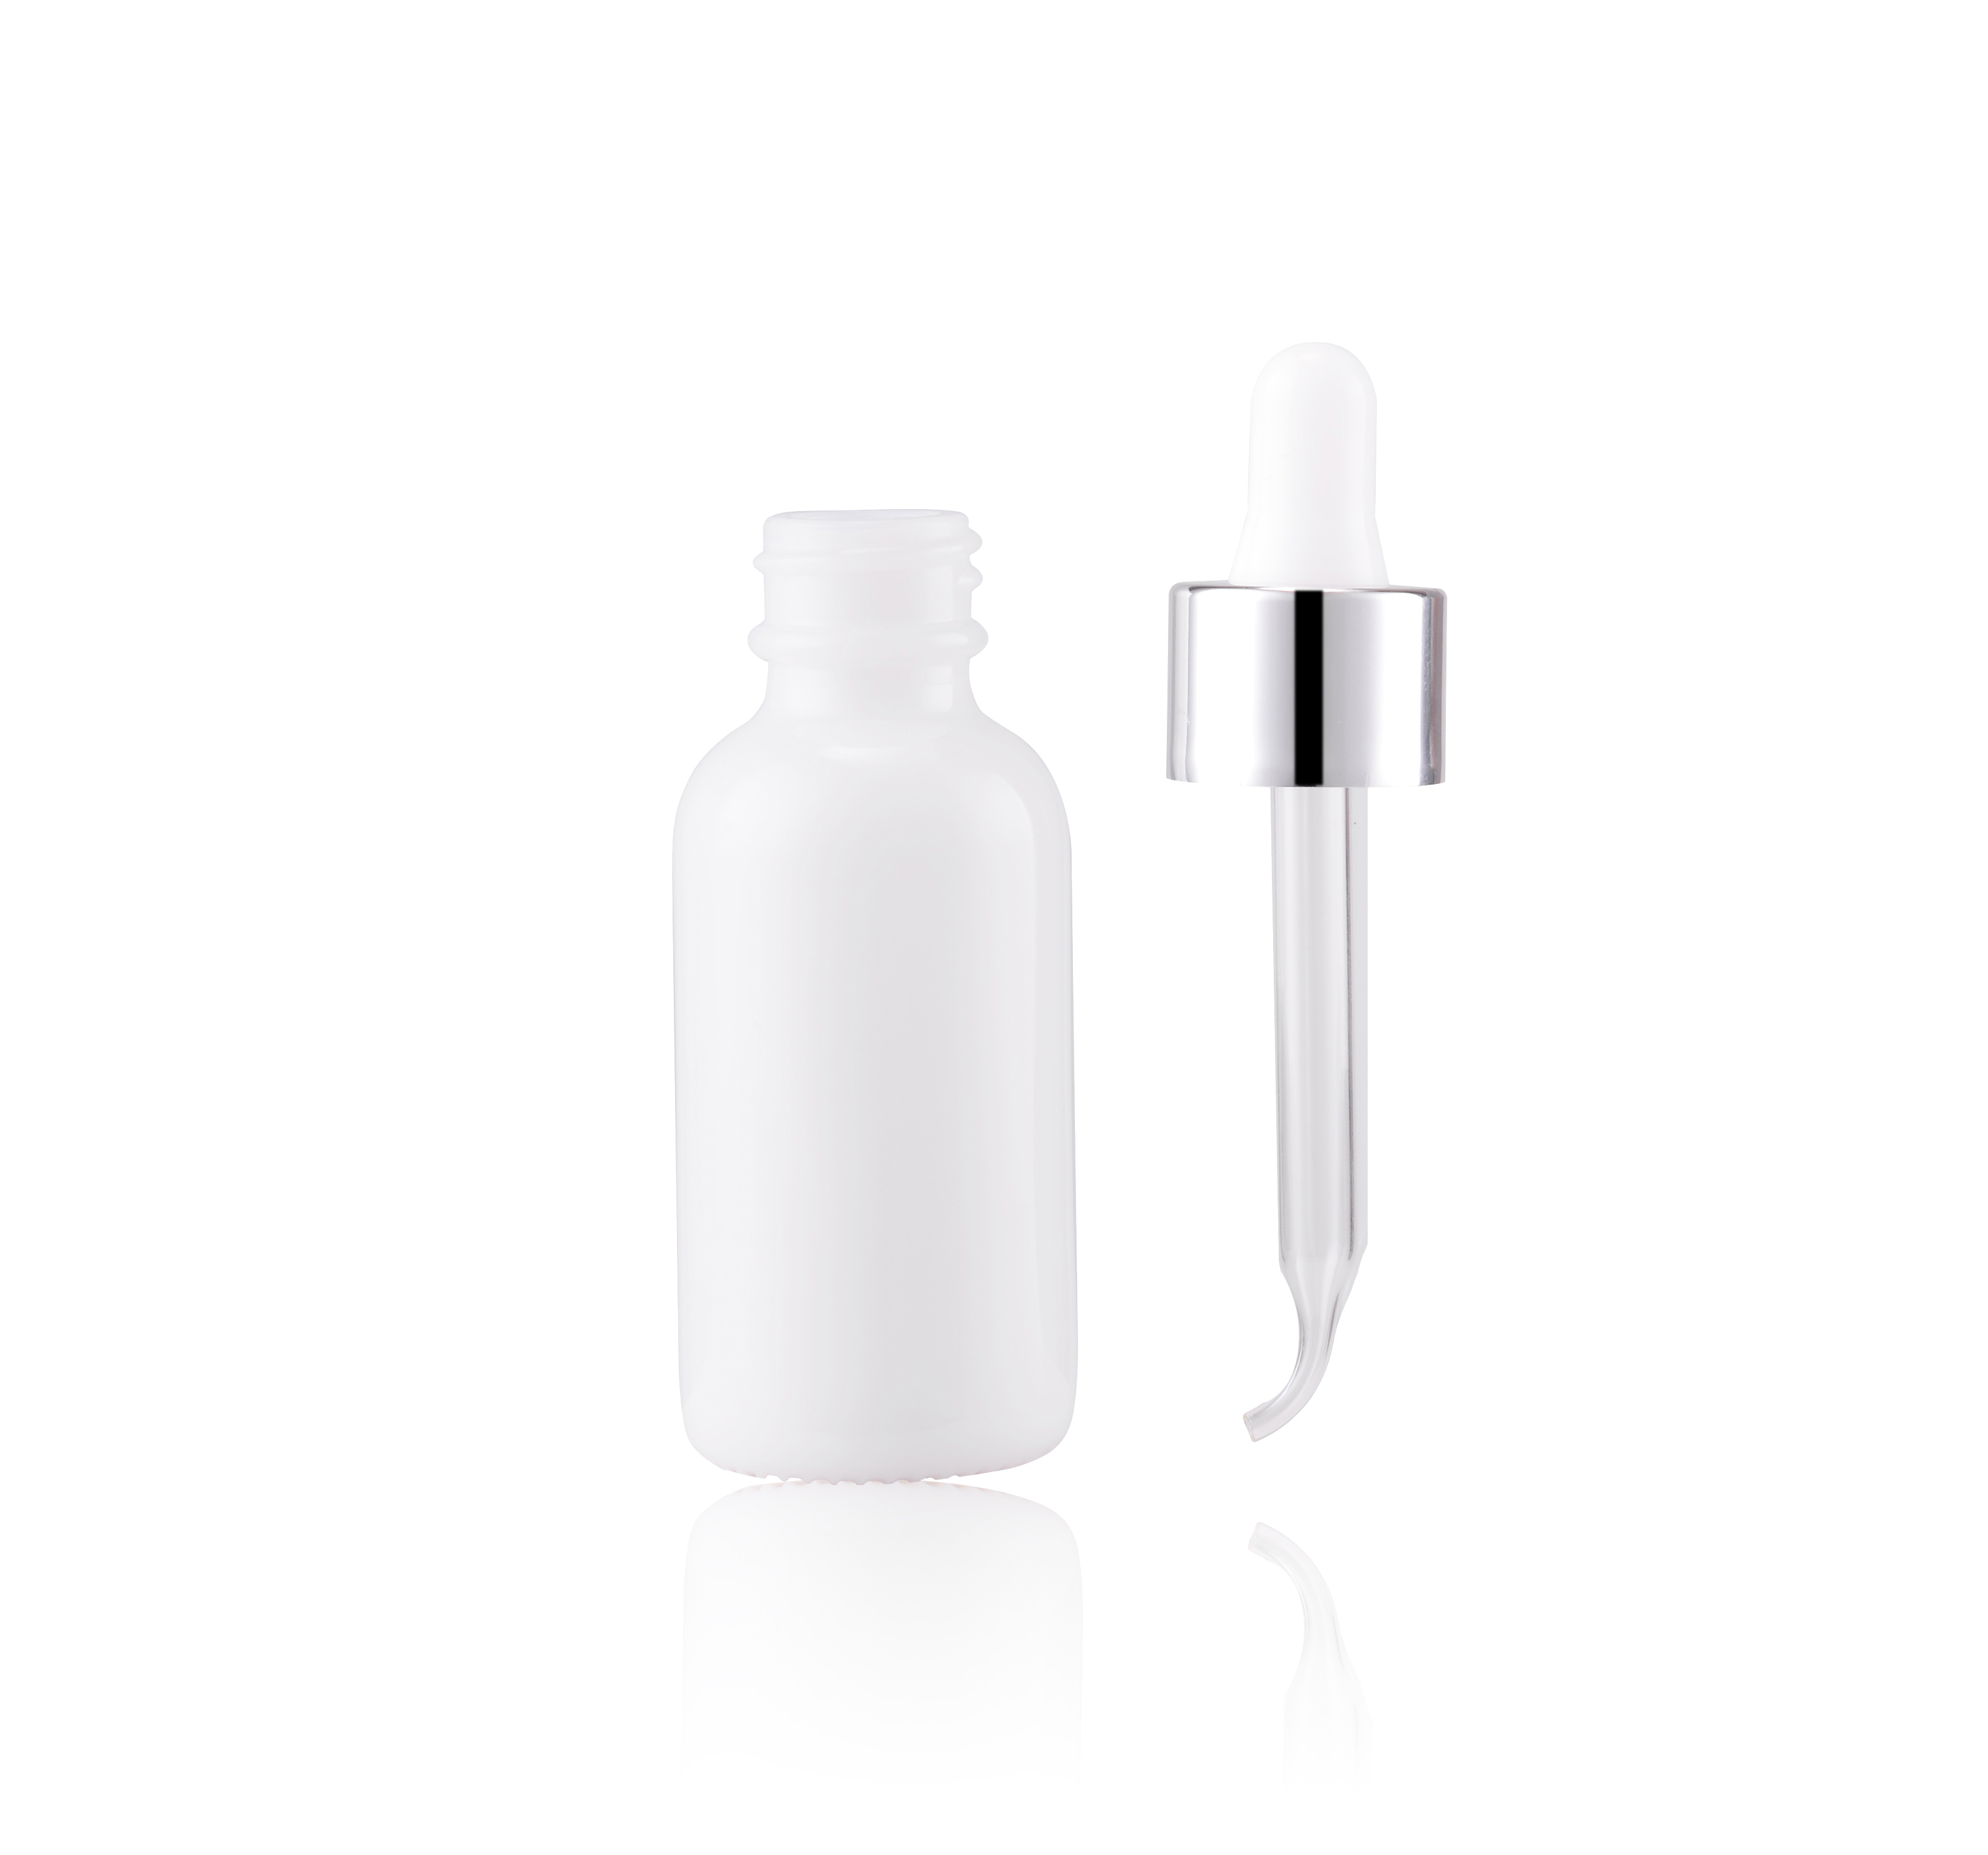 US Available Low Moq Cosmetic Face Serum Herb Hair Essential Oil Bottle 60 ml Round White 60ml Dropper Bottle with pipette